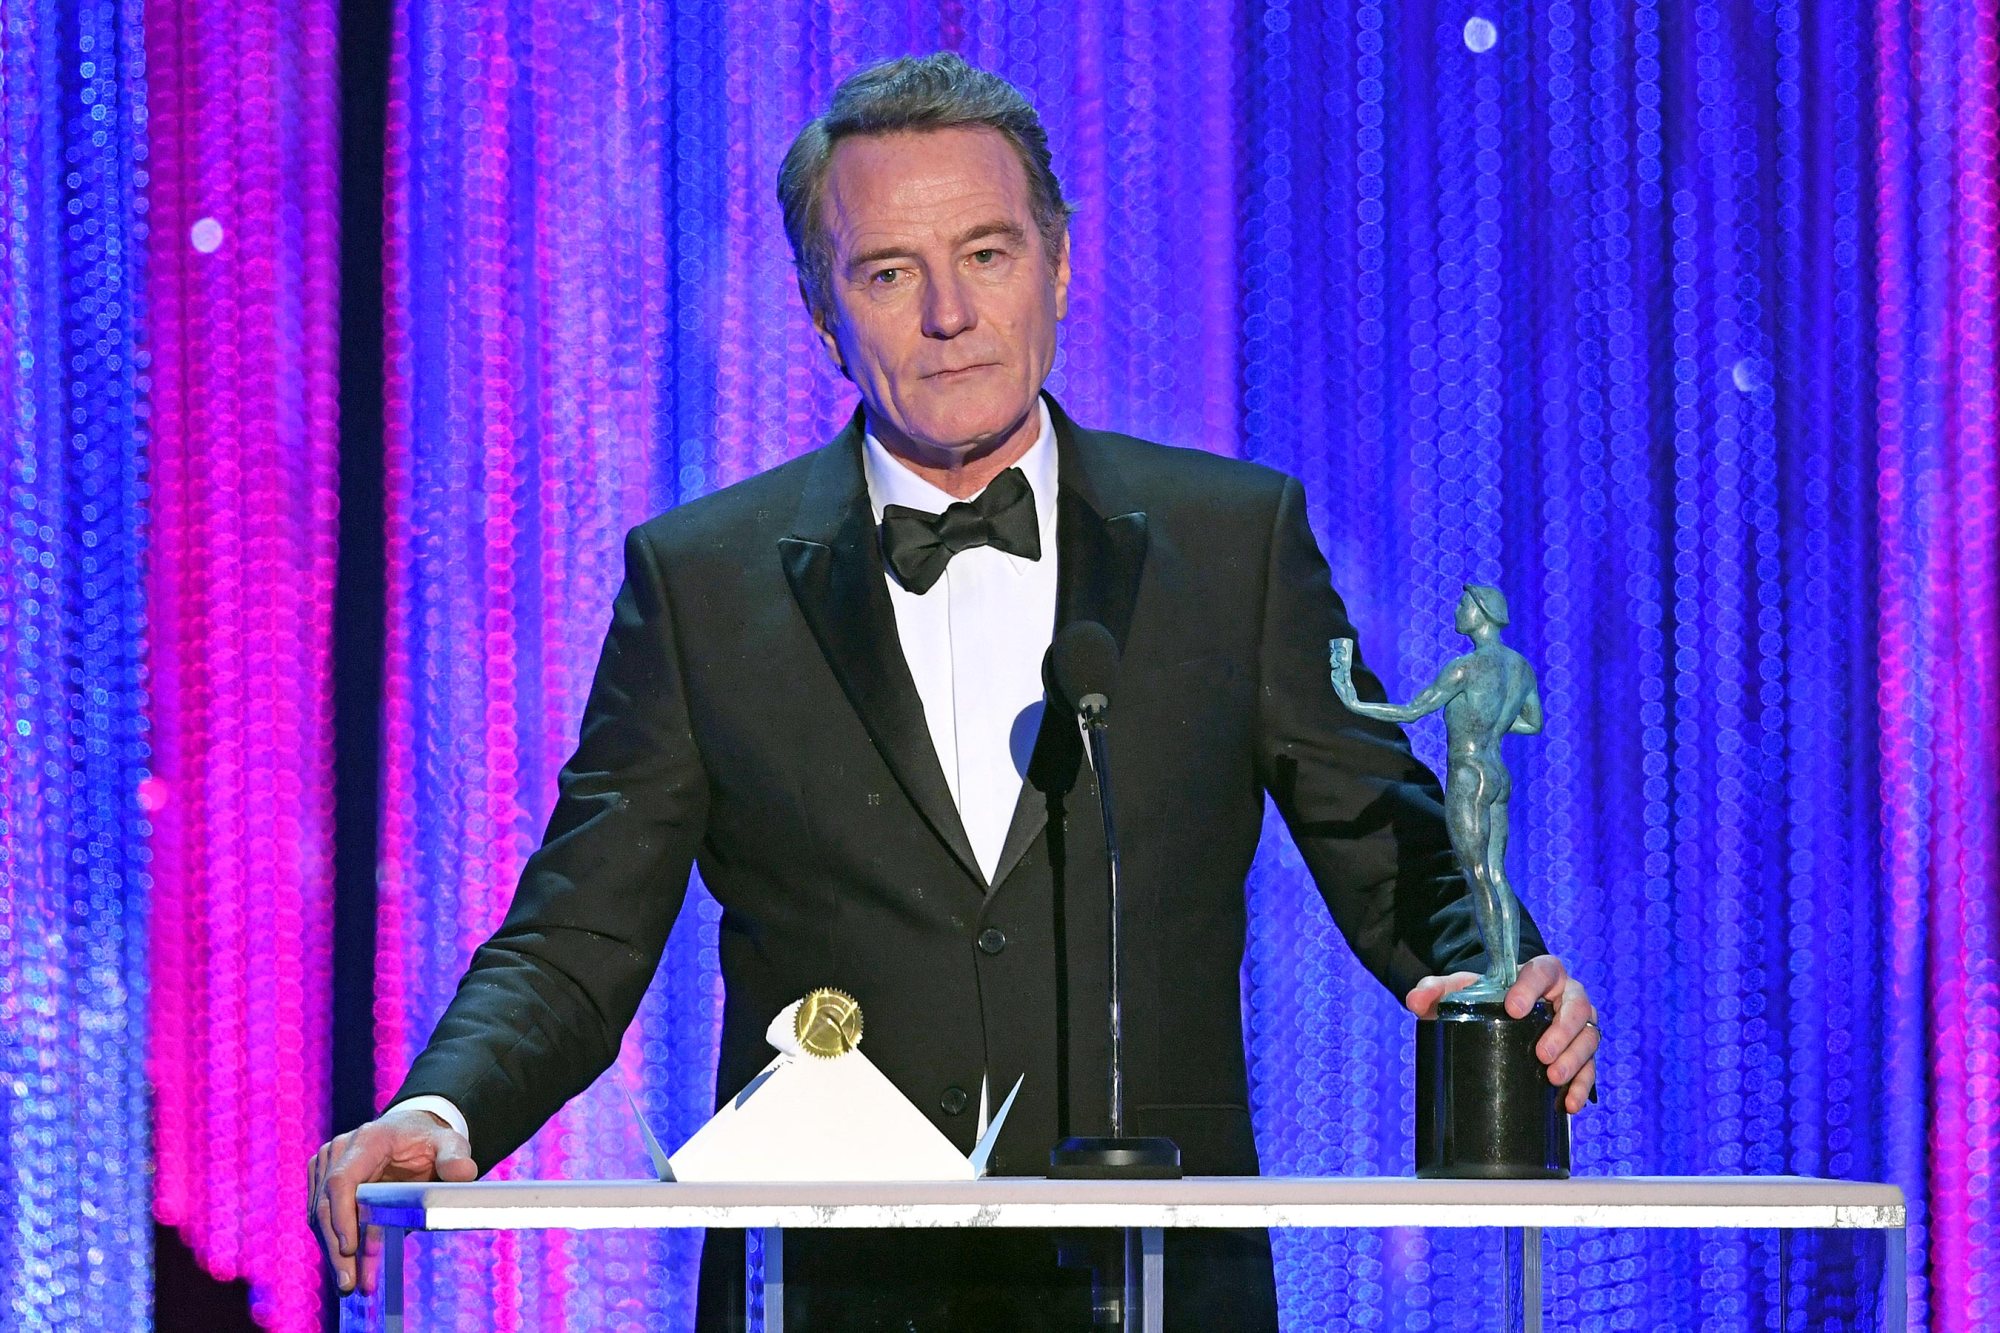 LOS ANGELES, CA - JANUARY 29:  Actor Bryan Cranston accepts Outstanding Performance by a Male Actor in a Miniseries or Television Movie for 'All the Way' onstage during The 23rd Annual Screen Actors Guild Awards at The Shrine Auditorium on January 29, 2017 in Los Angeles, California. 26592_014  (Photo by Kevin Winter/Getty Images )